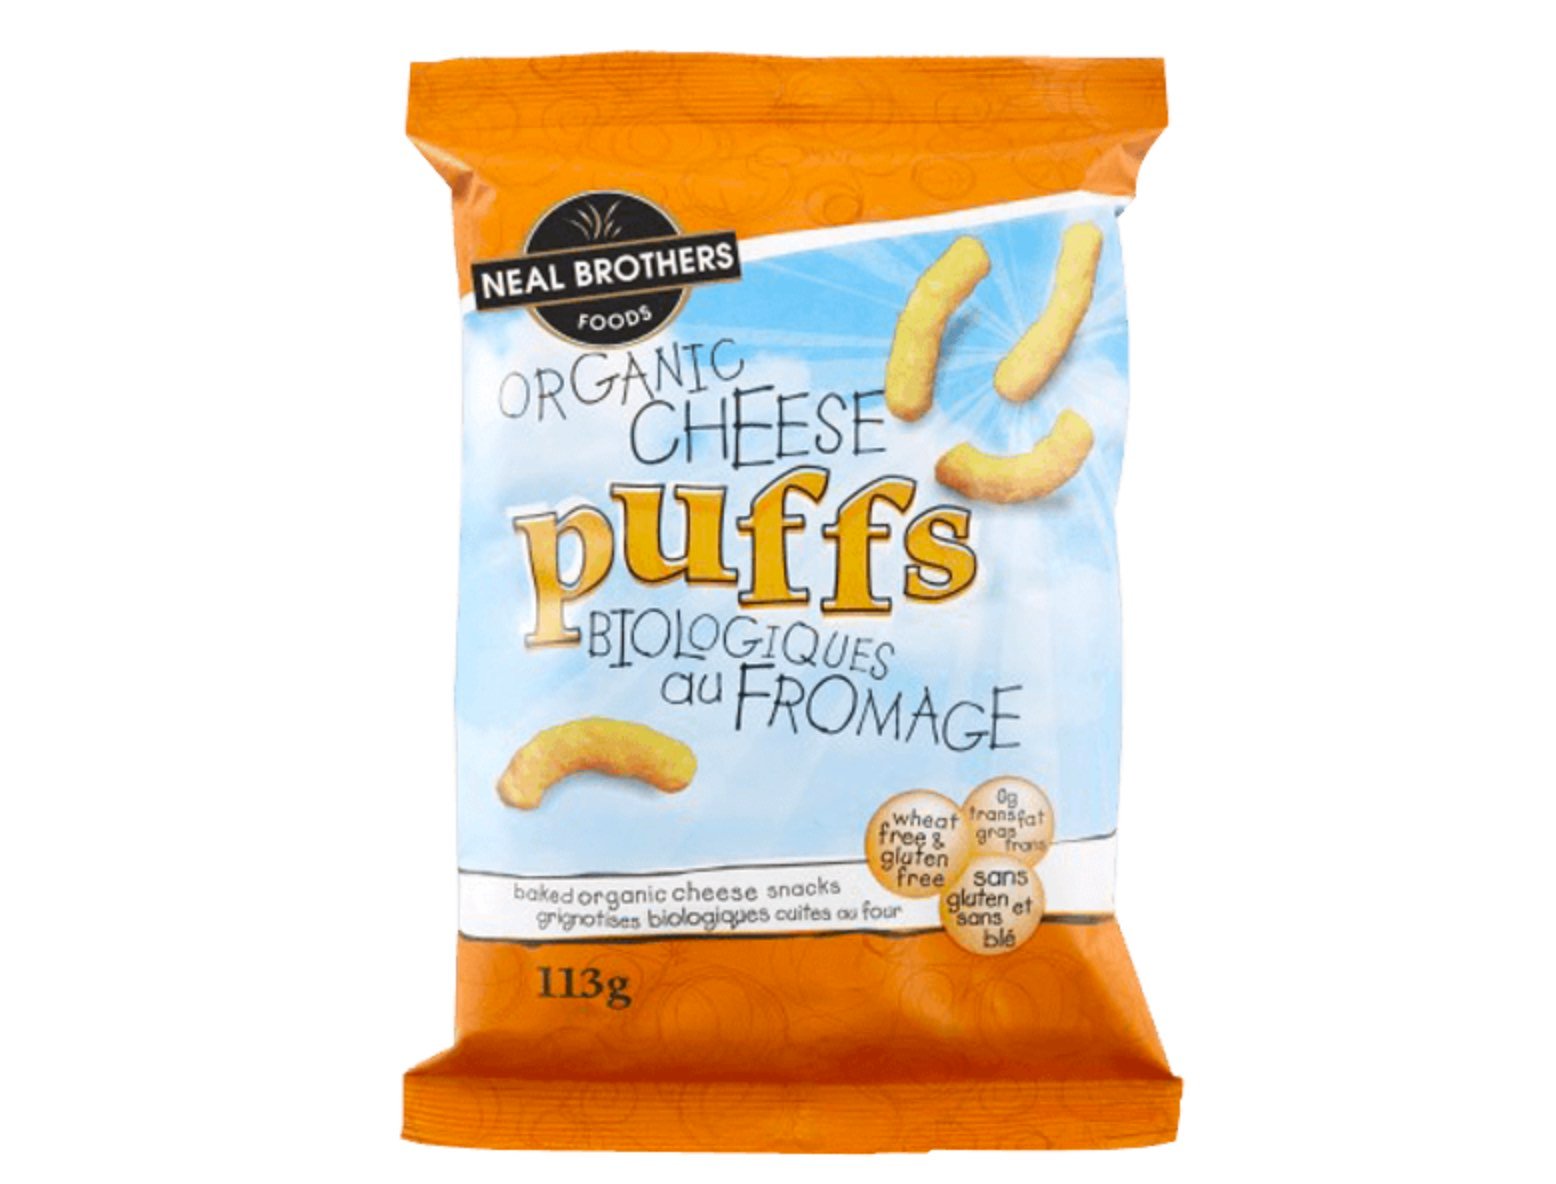 Bag of Neal Brothers Organic Cheese Puffs